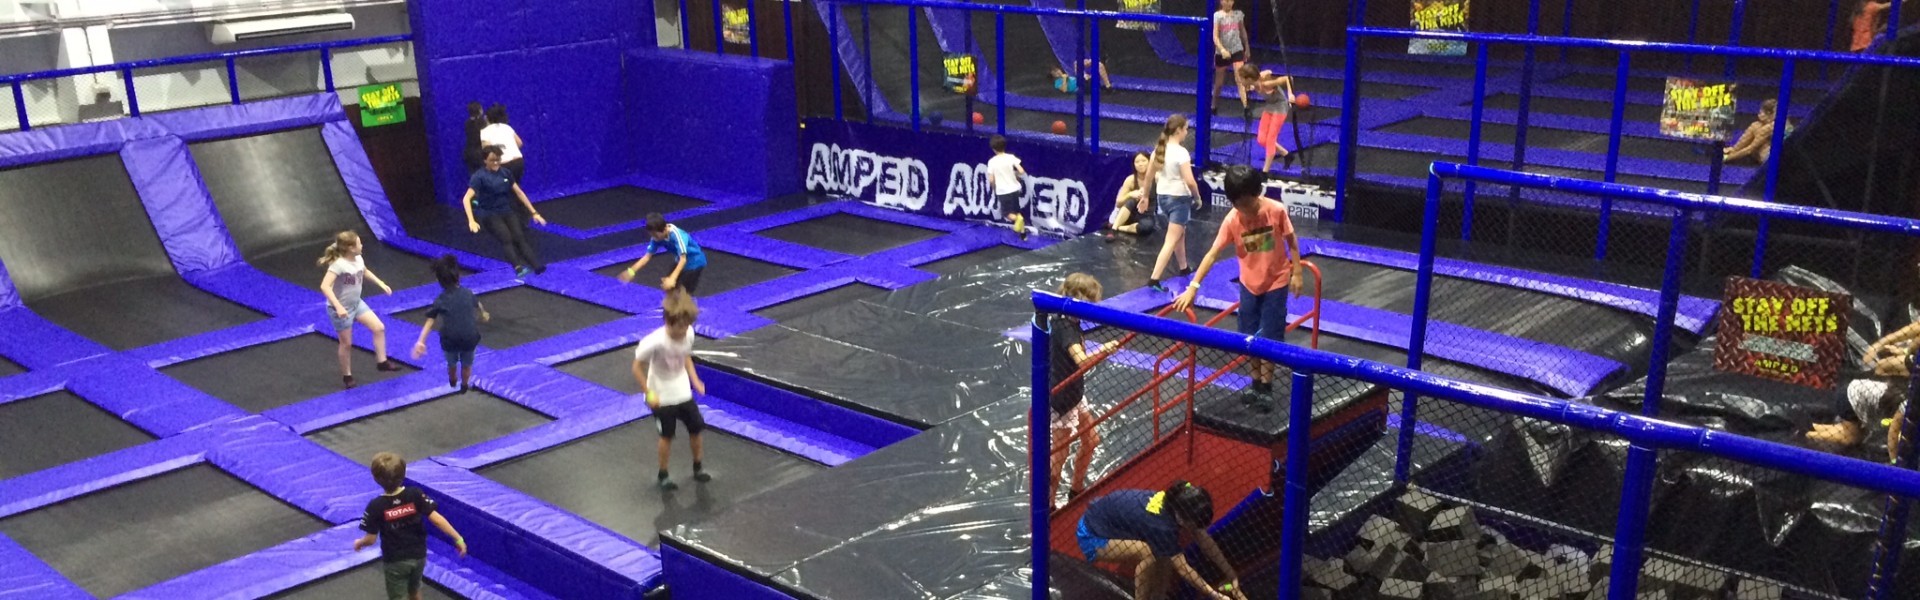 AMPED Trampoline Park, Malaysia, KL